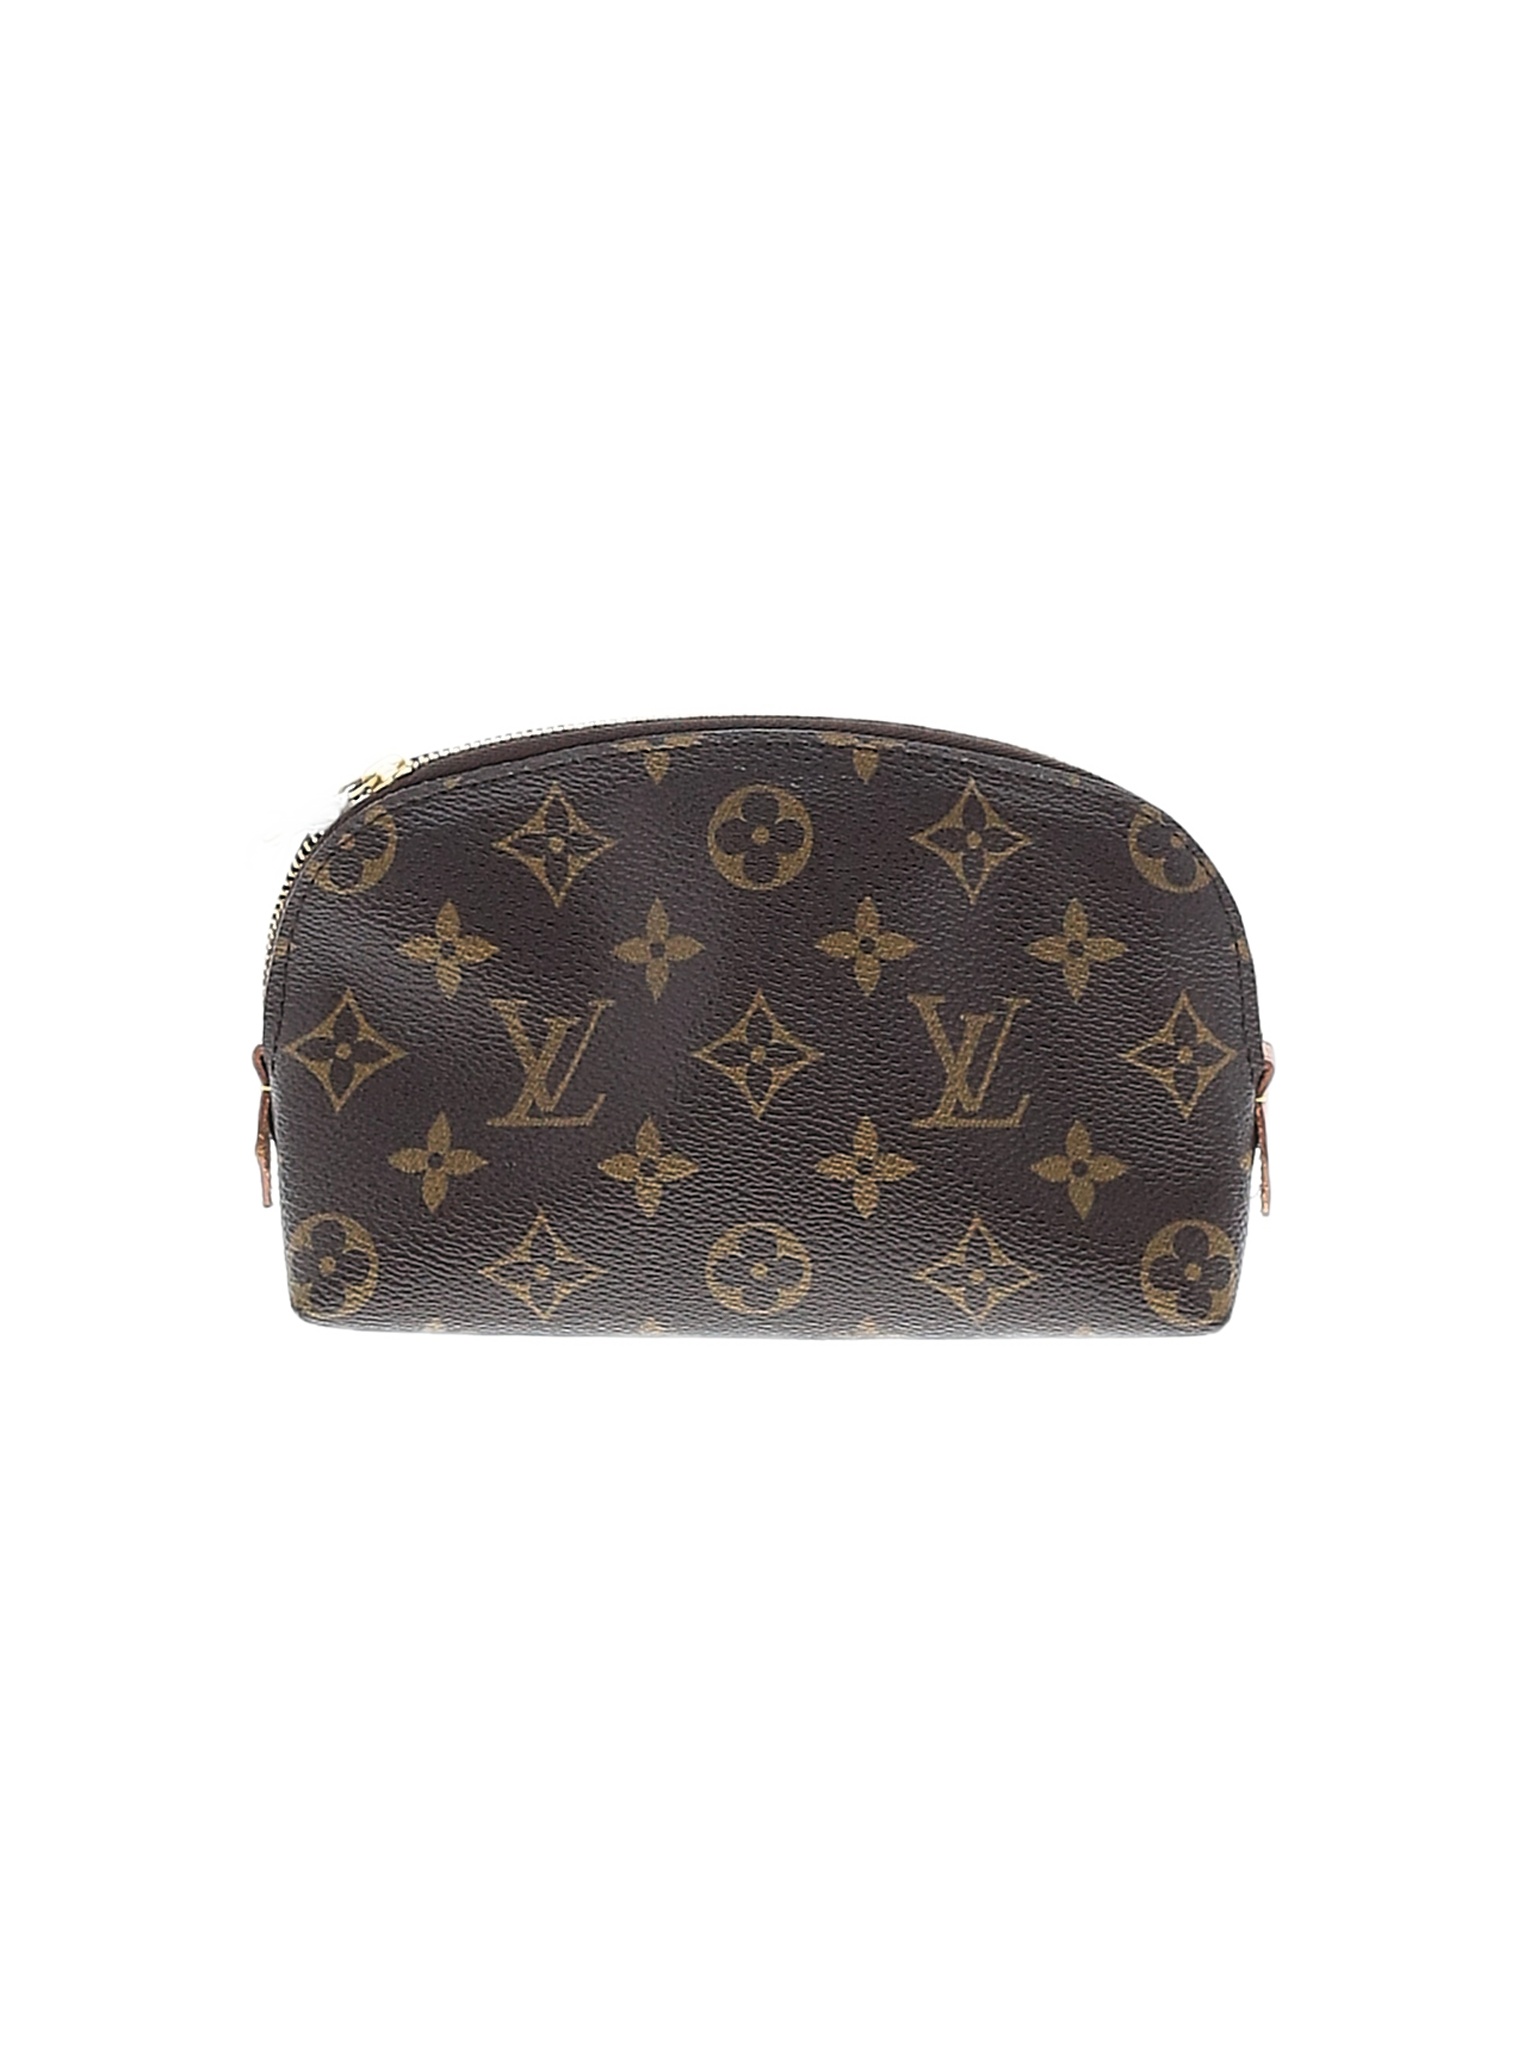 Louis Vuitton 100% Coated Canvas Brown Cosmetic Pouch One Size - 53% off